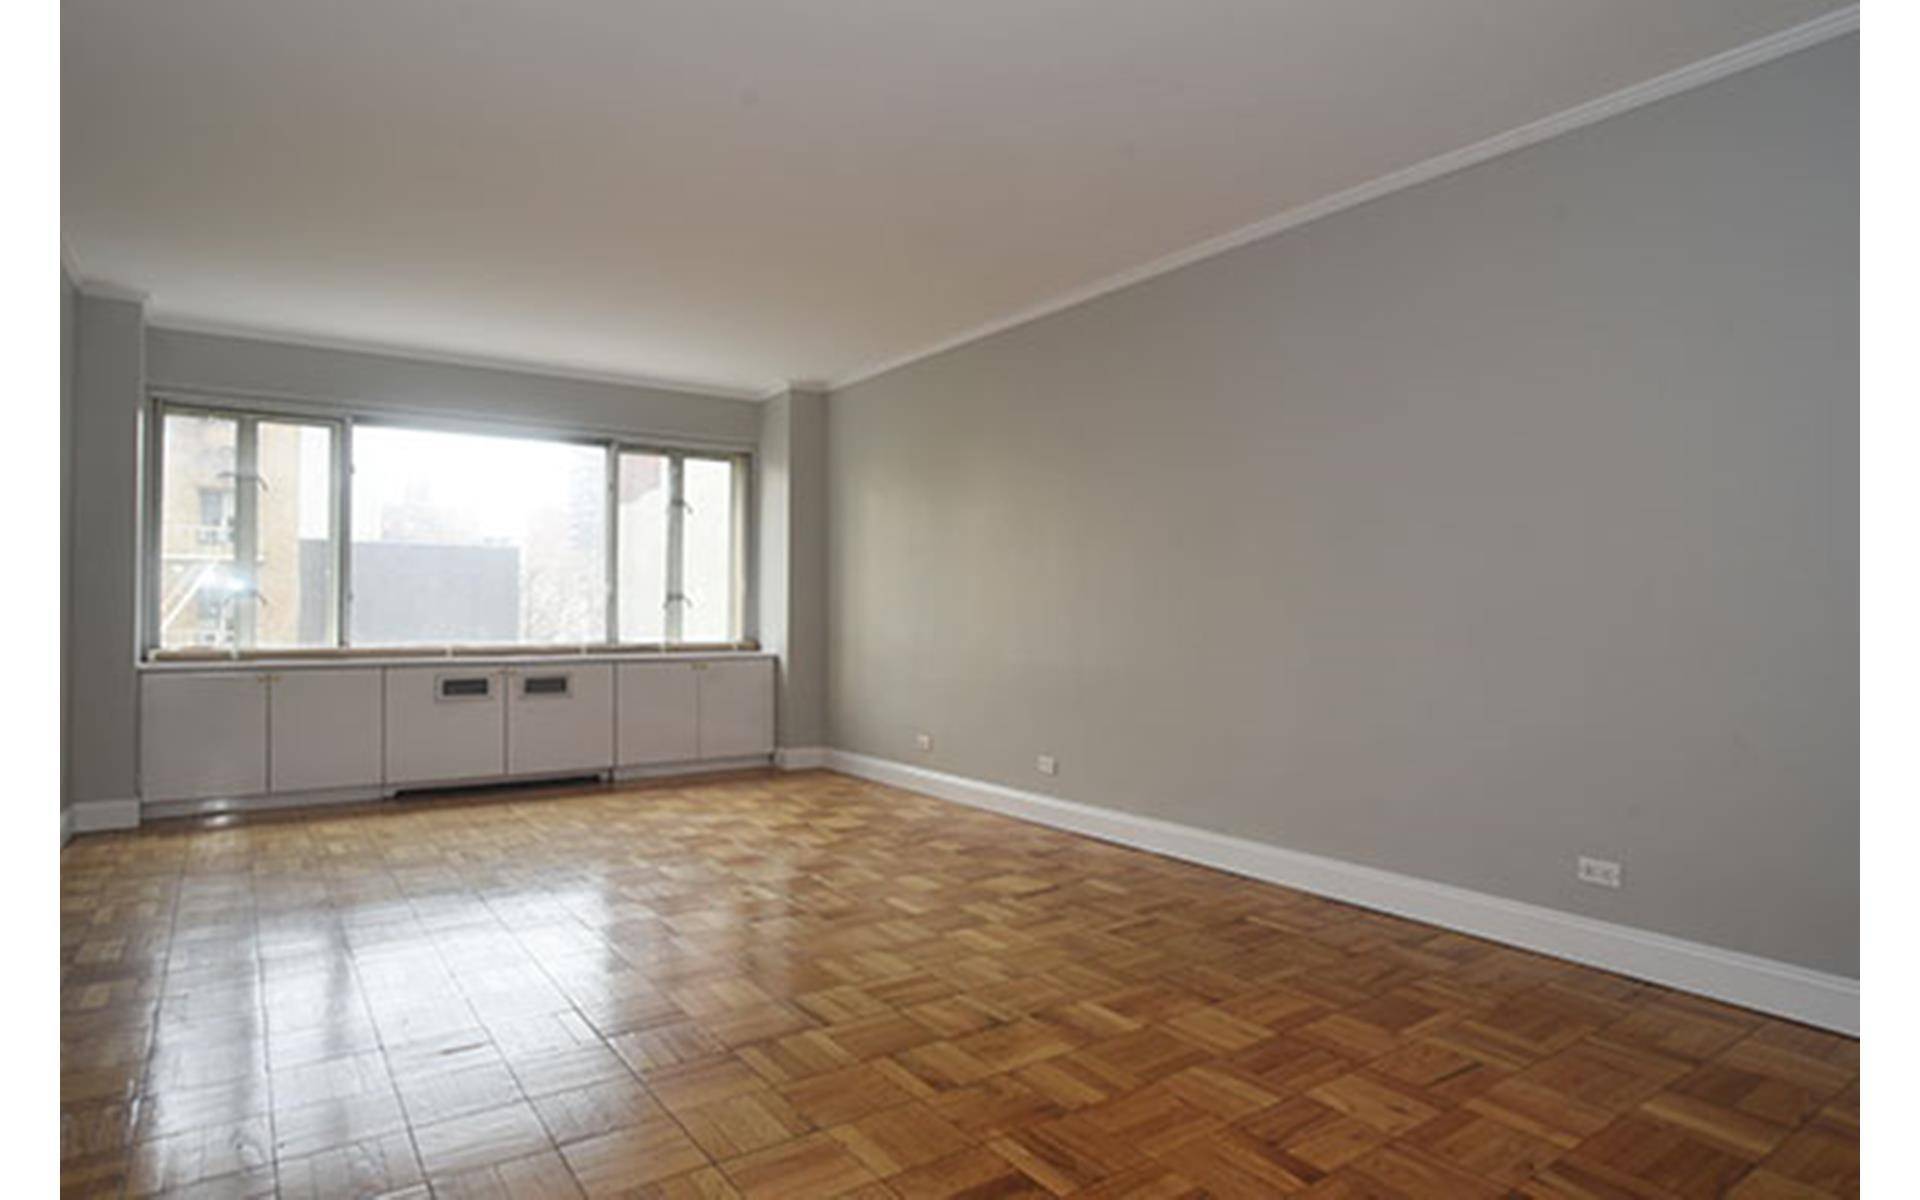 530 Sq. Ft. Studio with open east views, separate dressing area, marble bath, walk in closets, new kitchen, located in excellent location, close to restaurant, shops and public transportation.